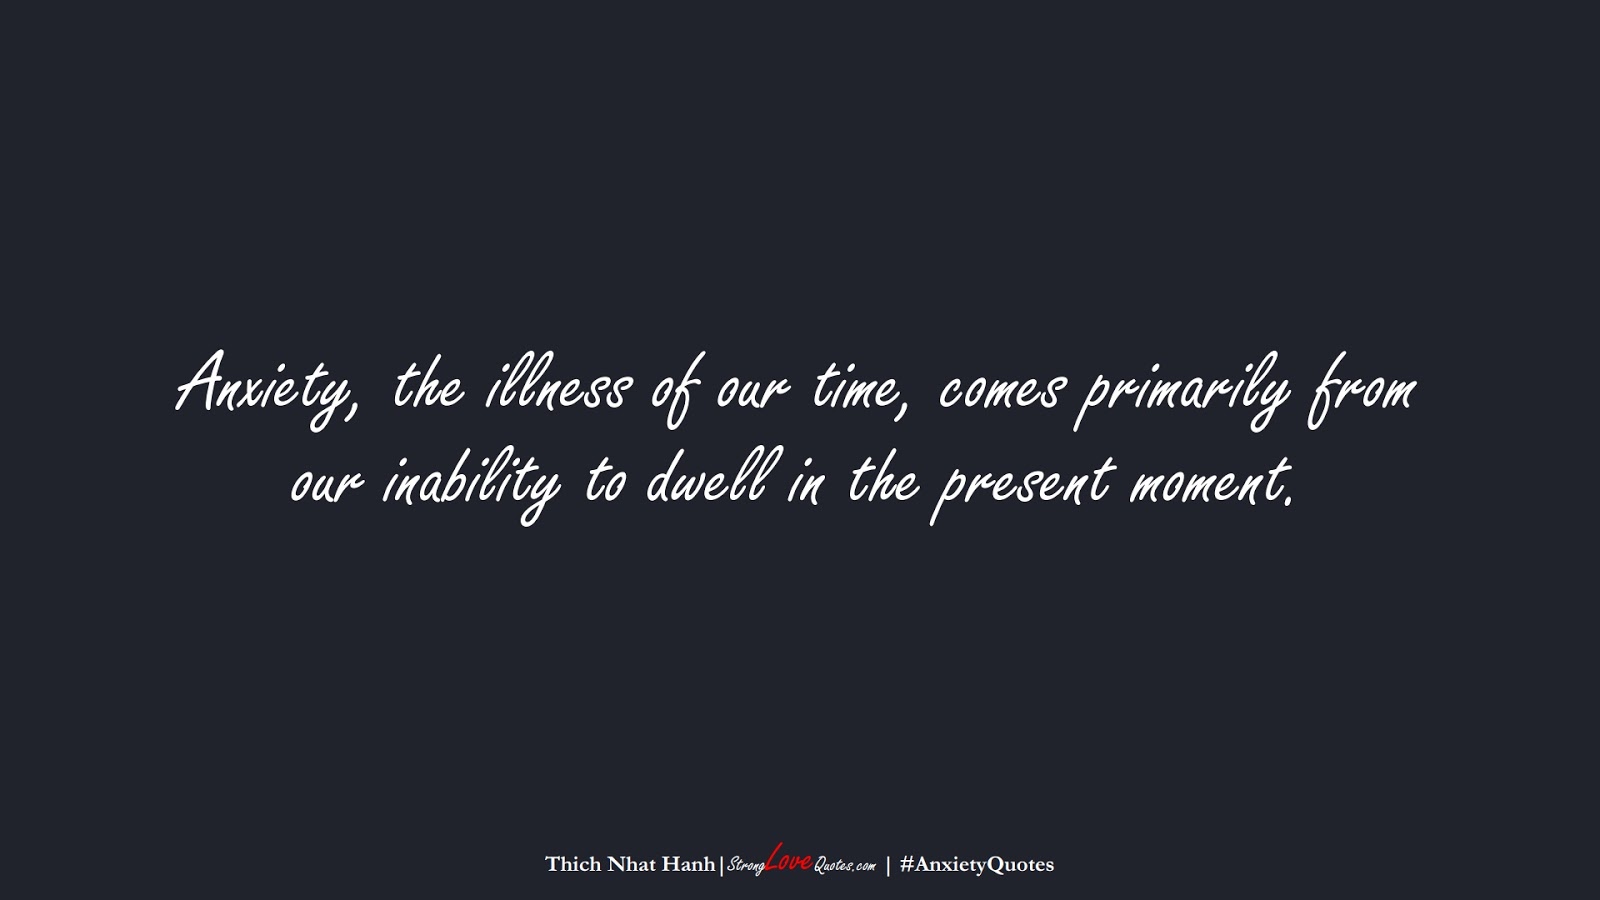 Anxiety, the illness of our time, comes primarily from our inability to dwell in the present moment. (Thich Nhat Hanh);  #AnxietyQuotes